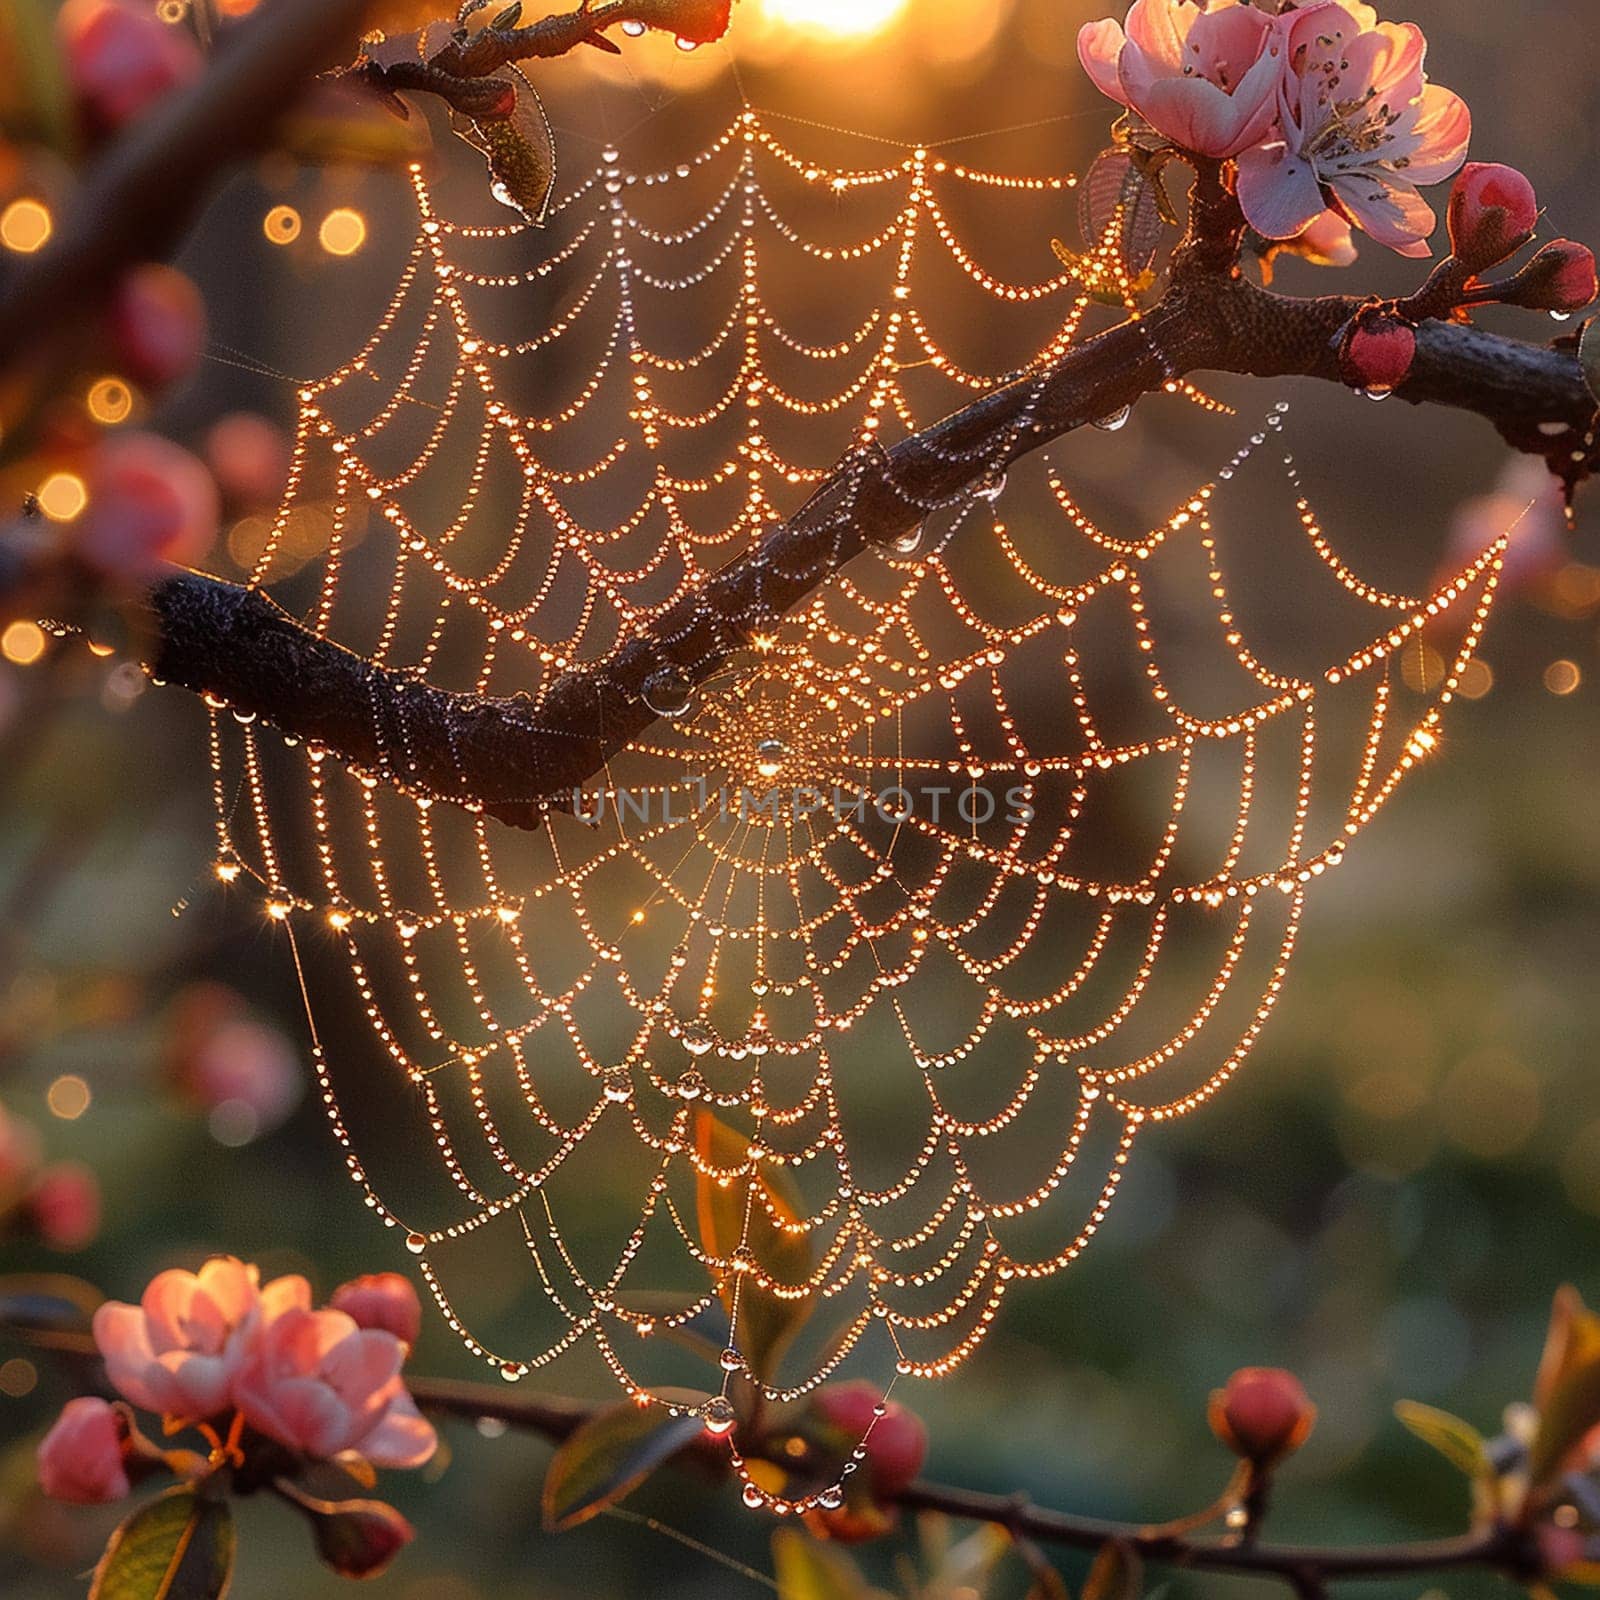 A dew-covered spider web in the early morning light by Benzoix